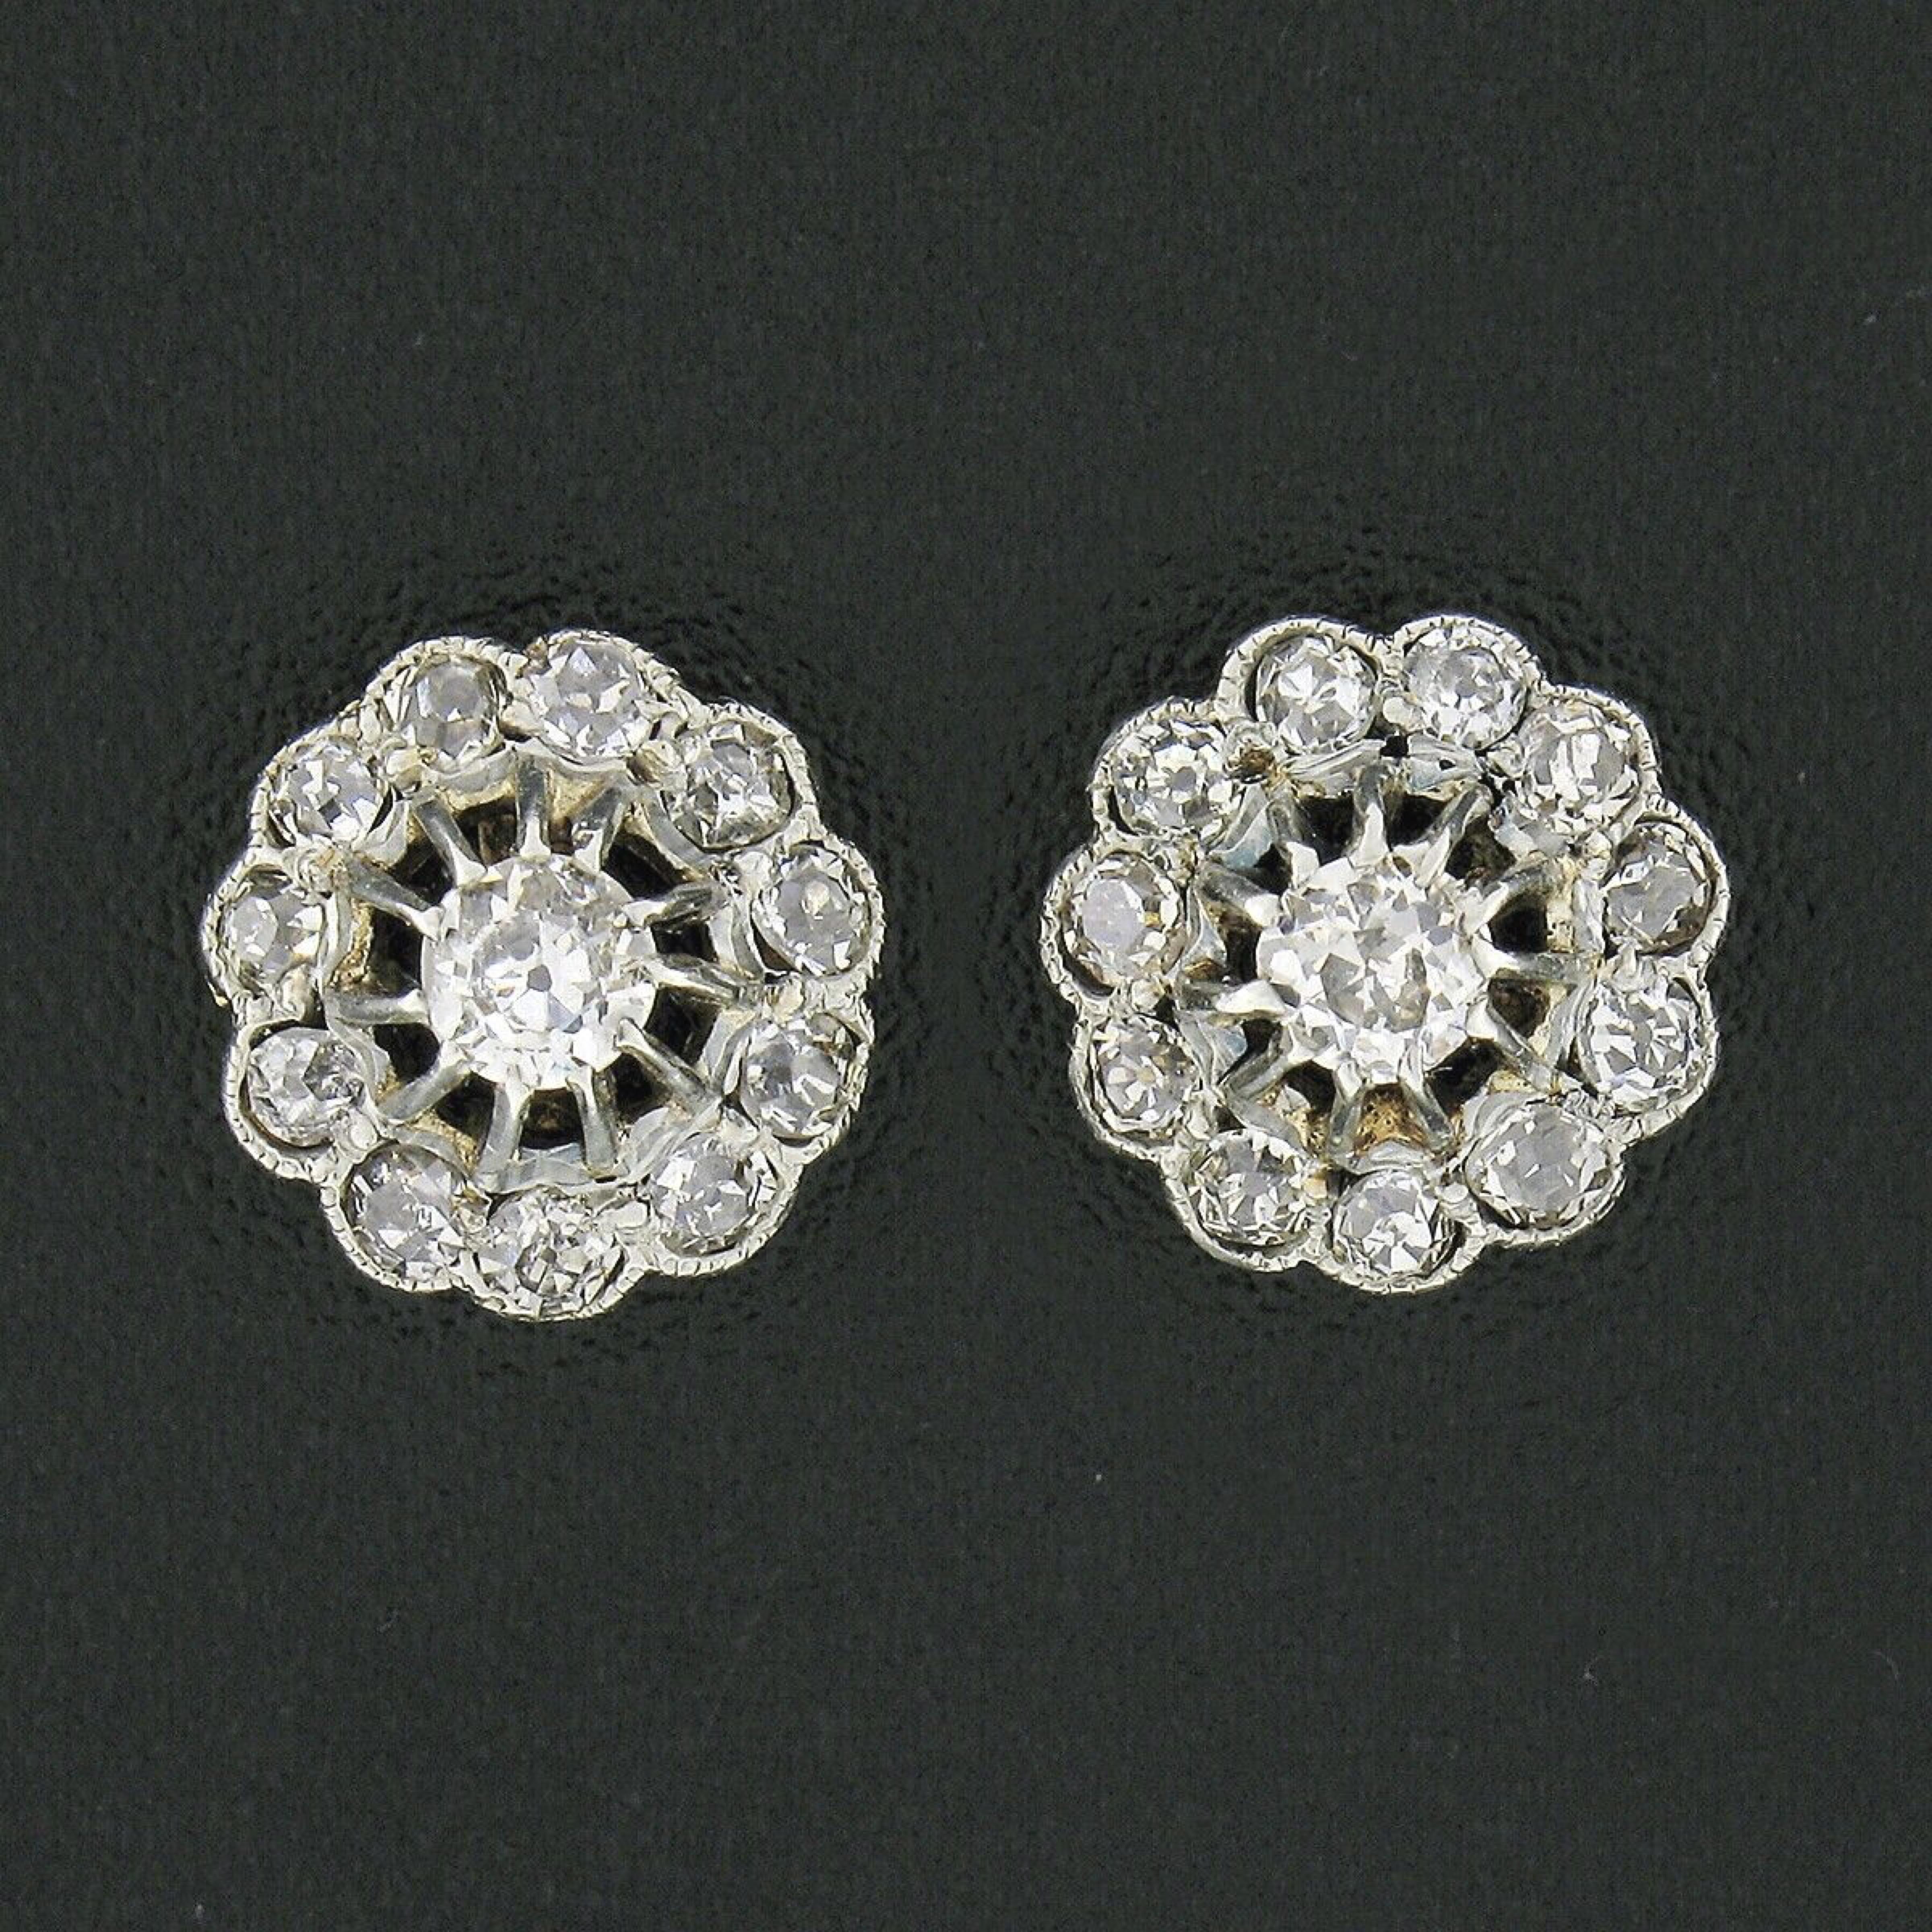 These gorgeous antique stud earrings were crafted during the early Victorian era from solid 14k yellow gold with a white gold top and silver posts. They feature a lovely flower cluster design set with old mine and single cut diamonds throughout. The